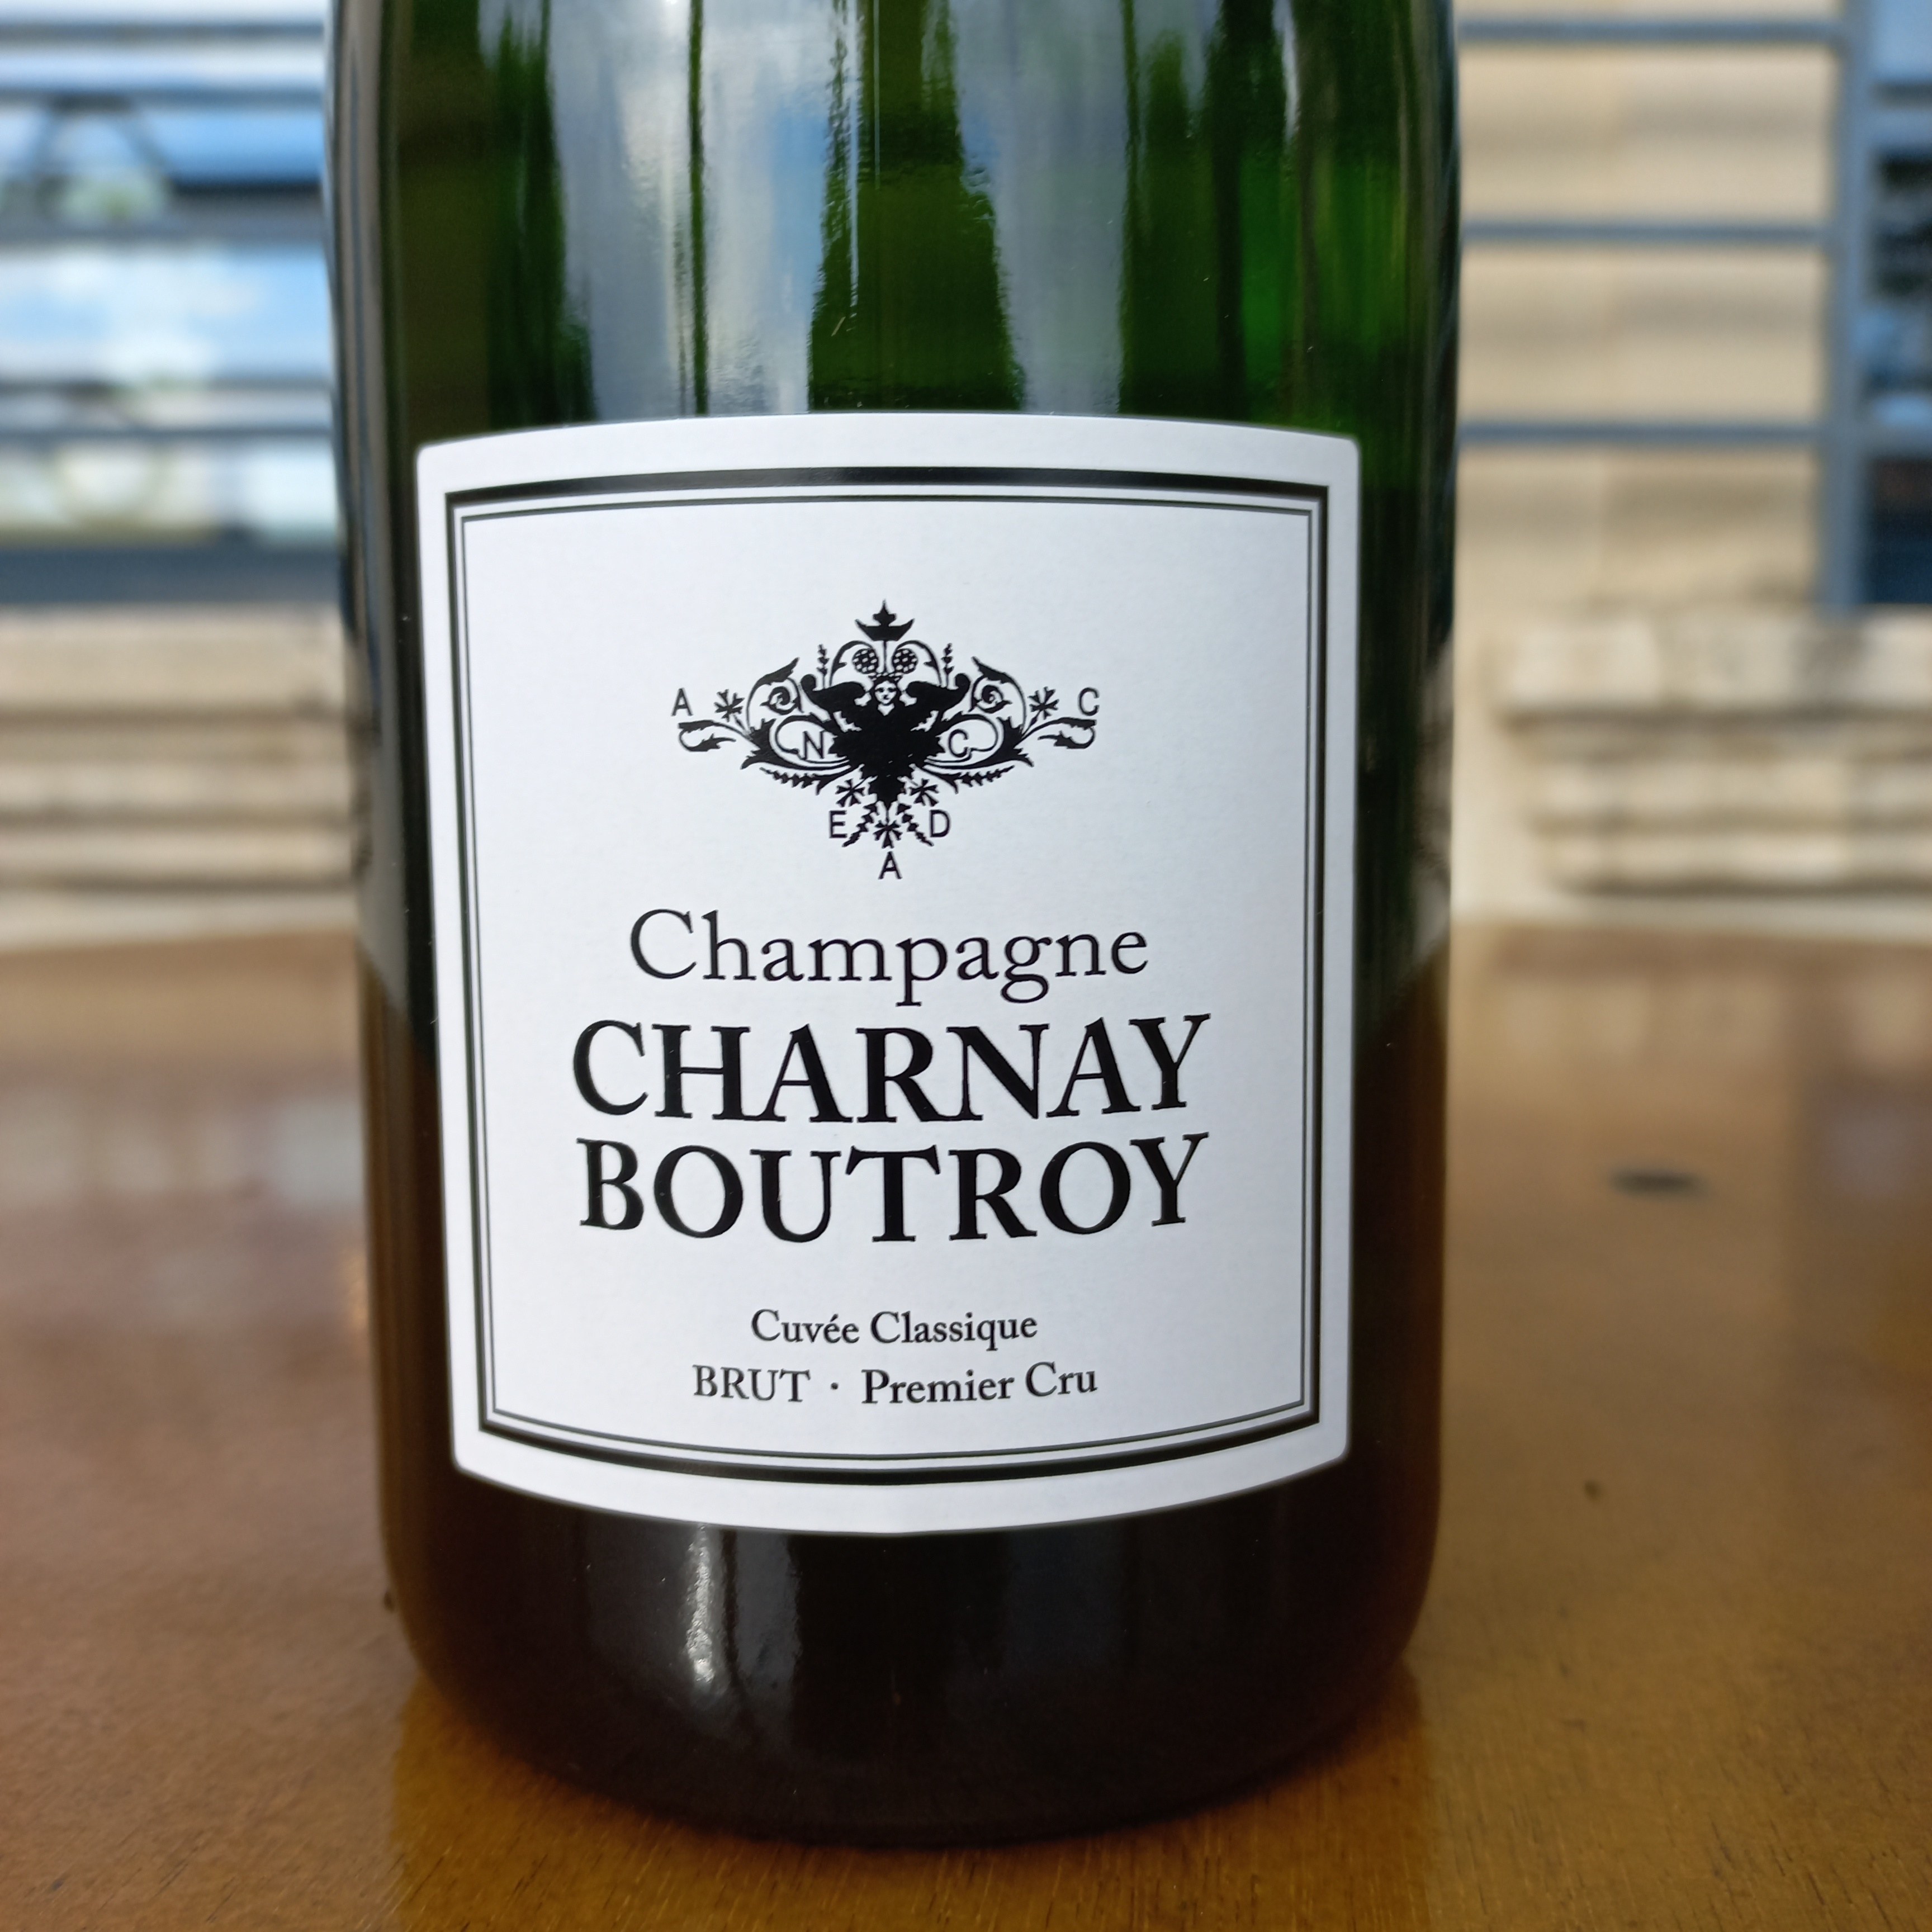 Champagne Charnay Boutroy. Cuvée Classique 3